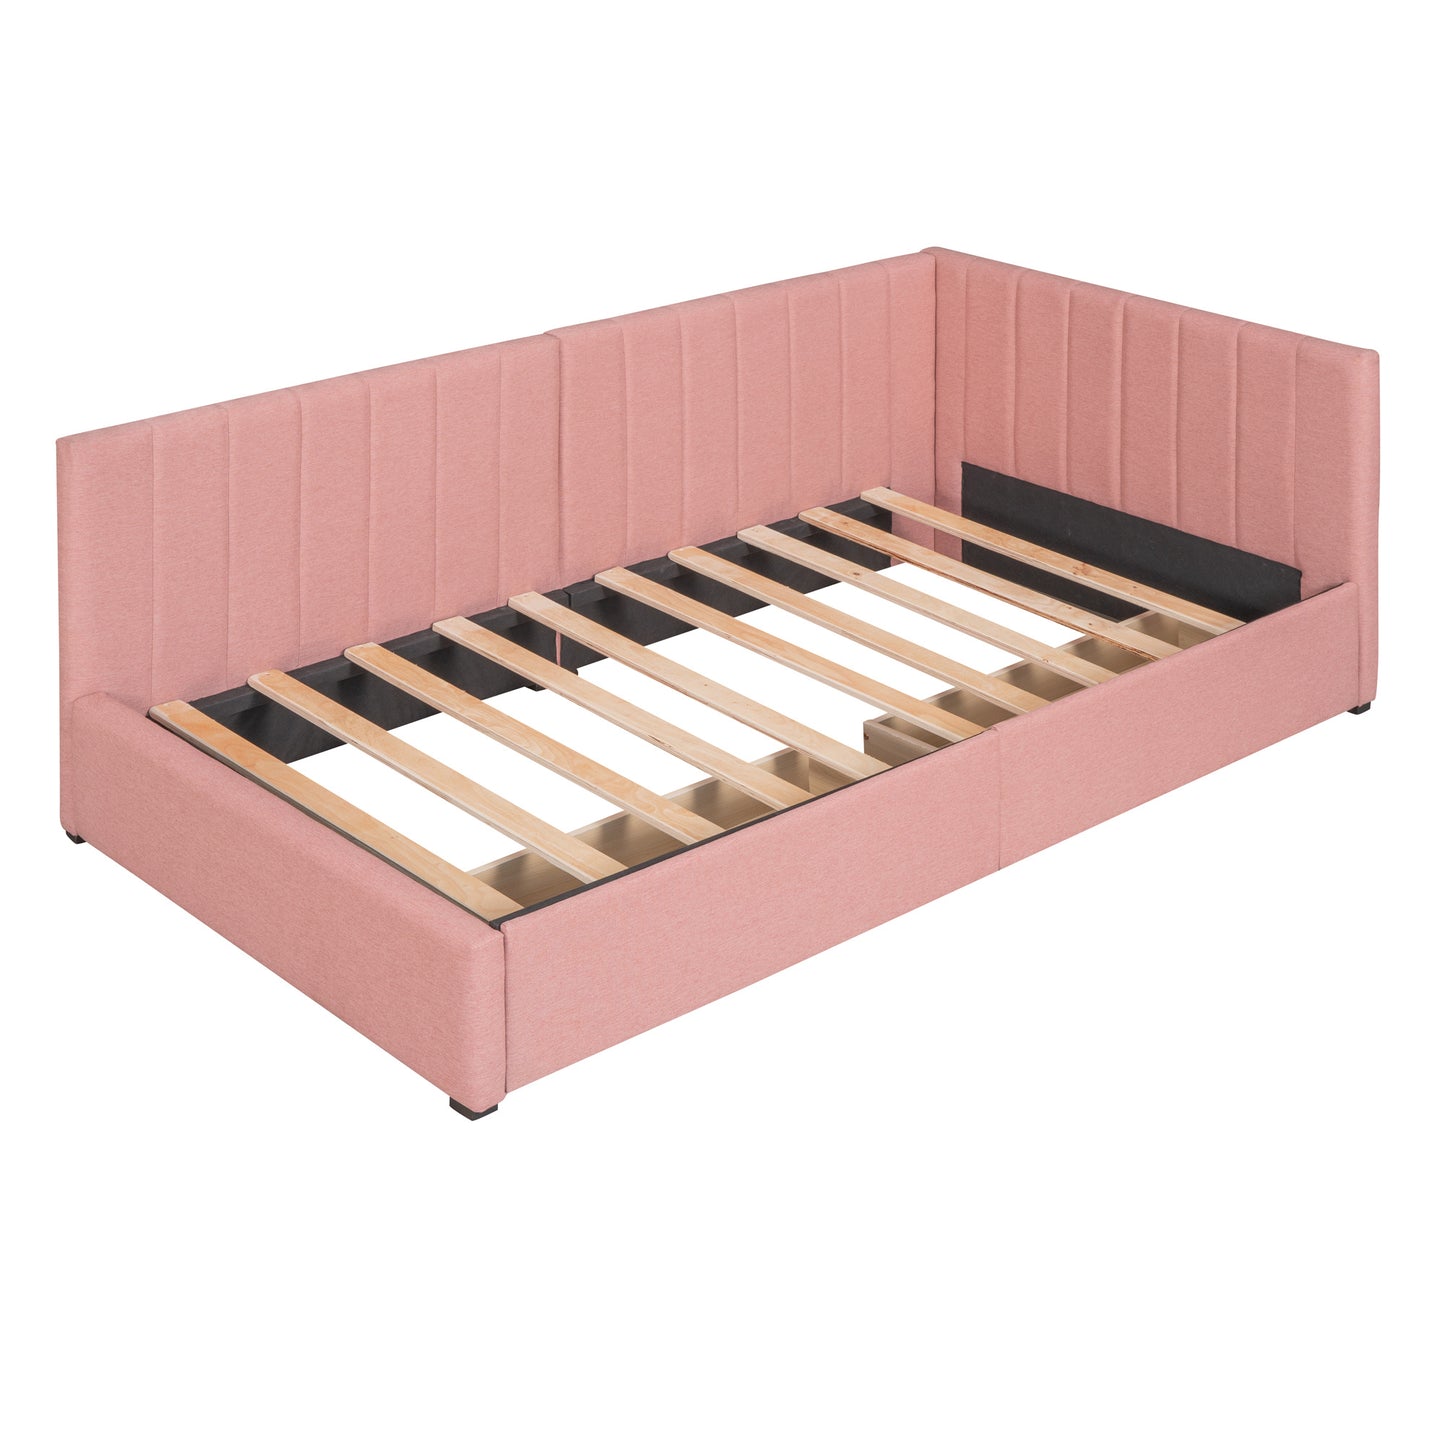 upholstered bed with 2 storage drawers, pink